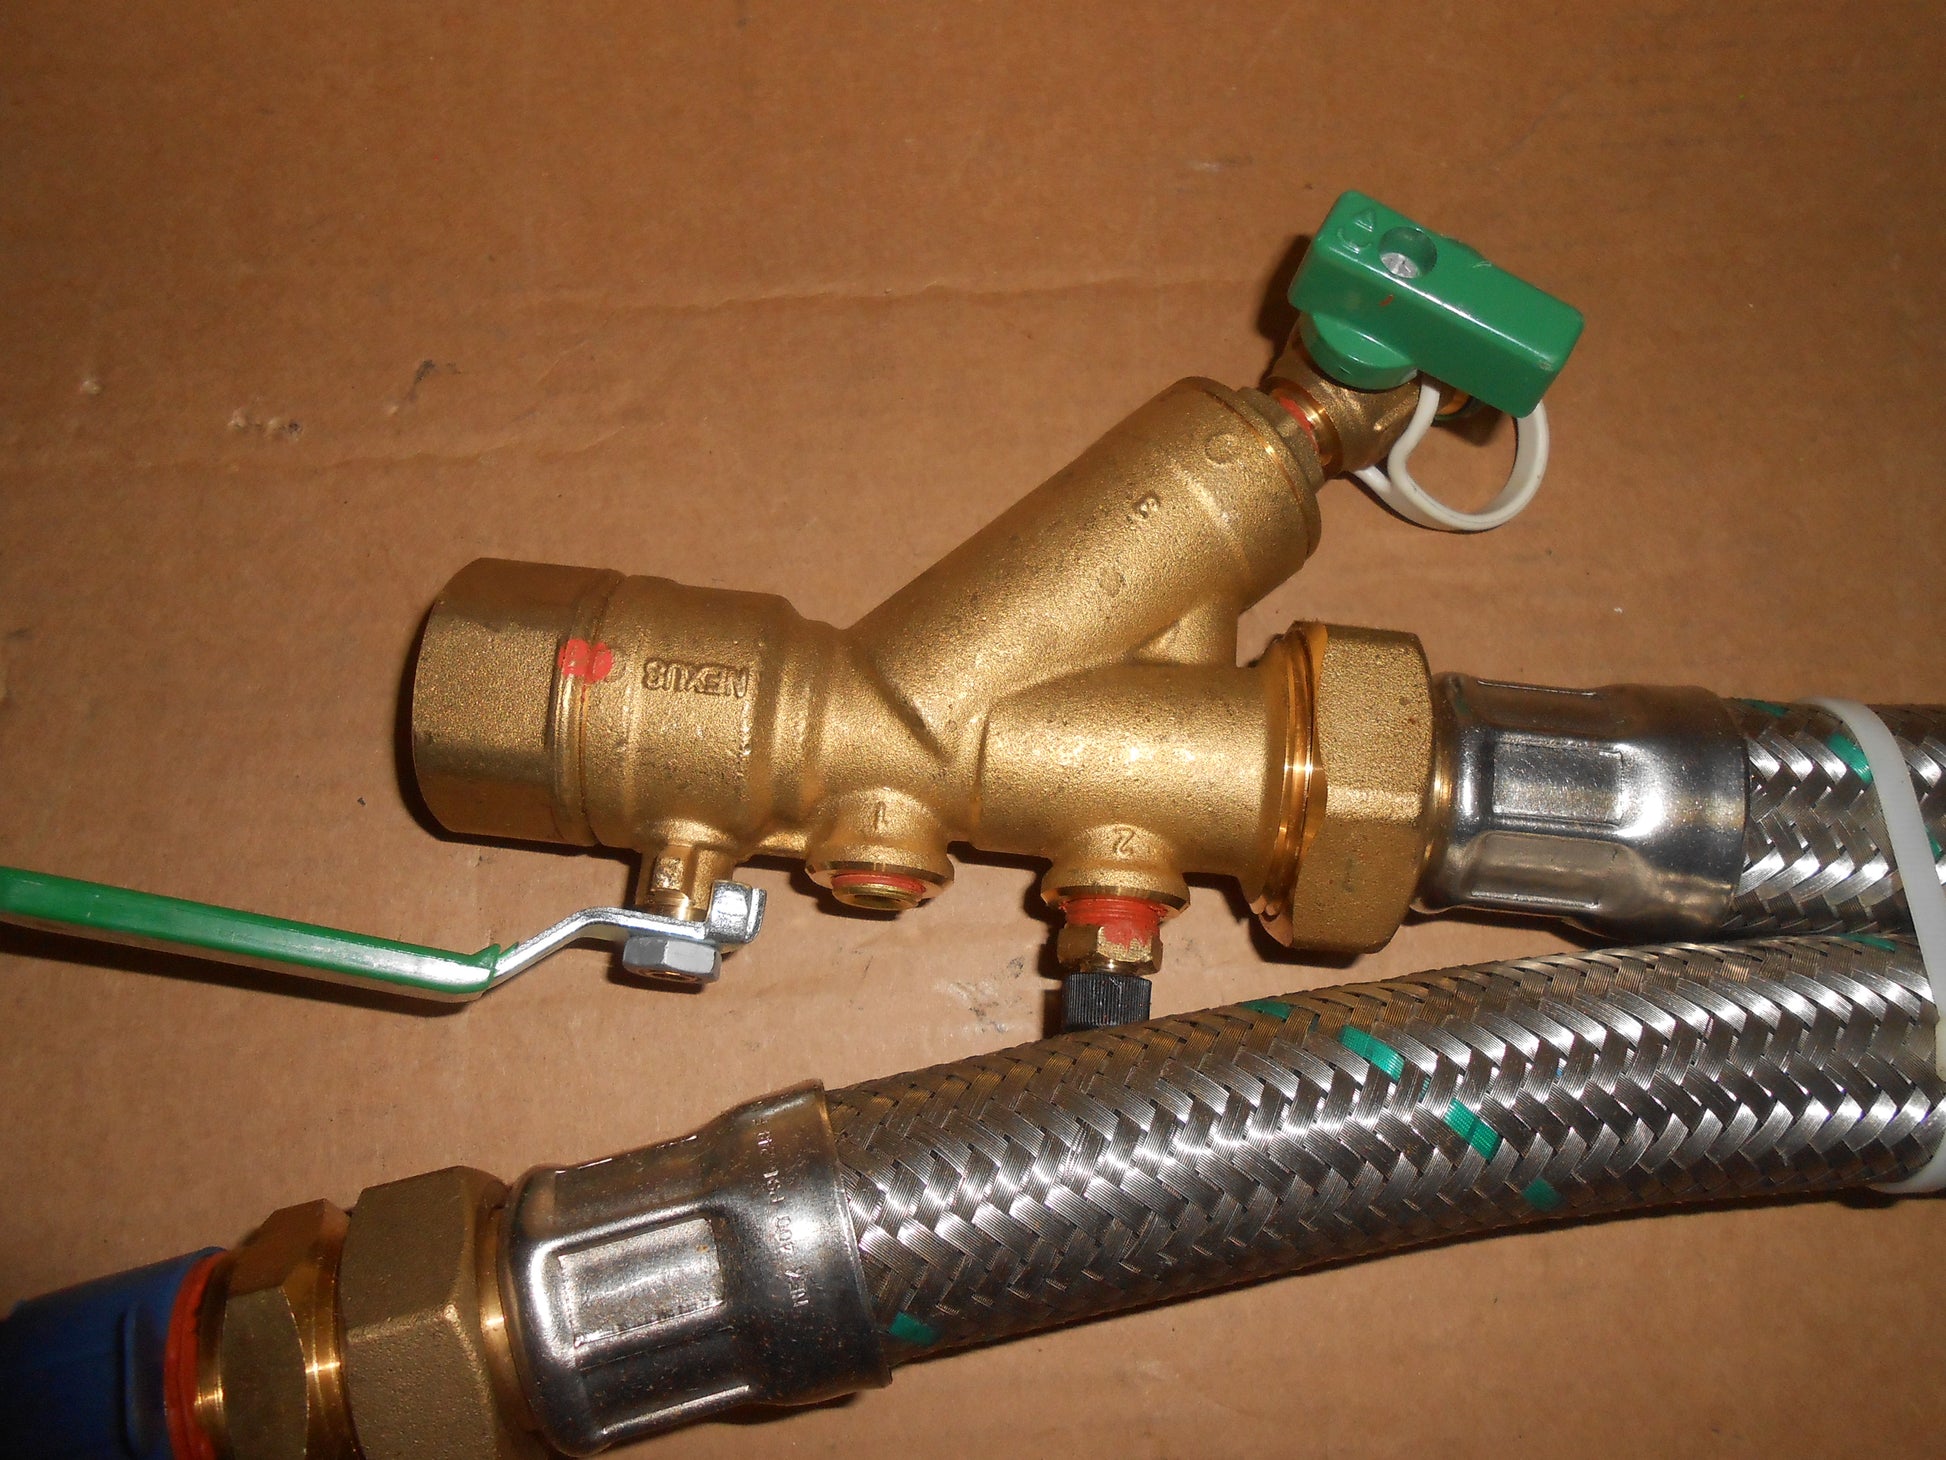 1" x 24" 9GPM HOSE ASSEMBLY KIT WITH ISOLATION VALVE, AUTO FLOW REGULATOR AND STRAINER